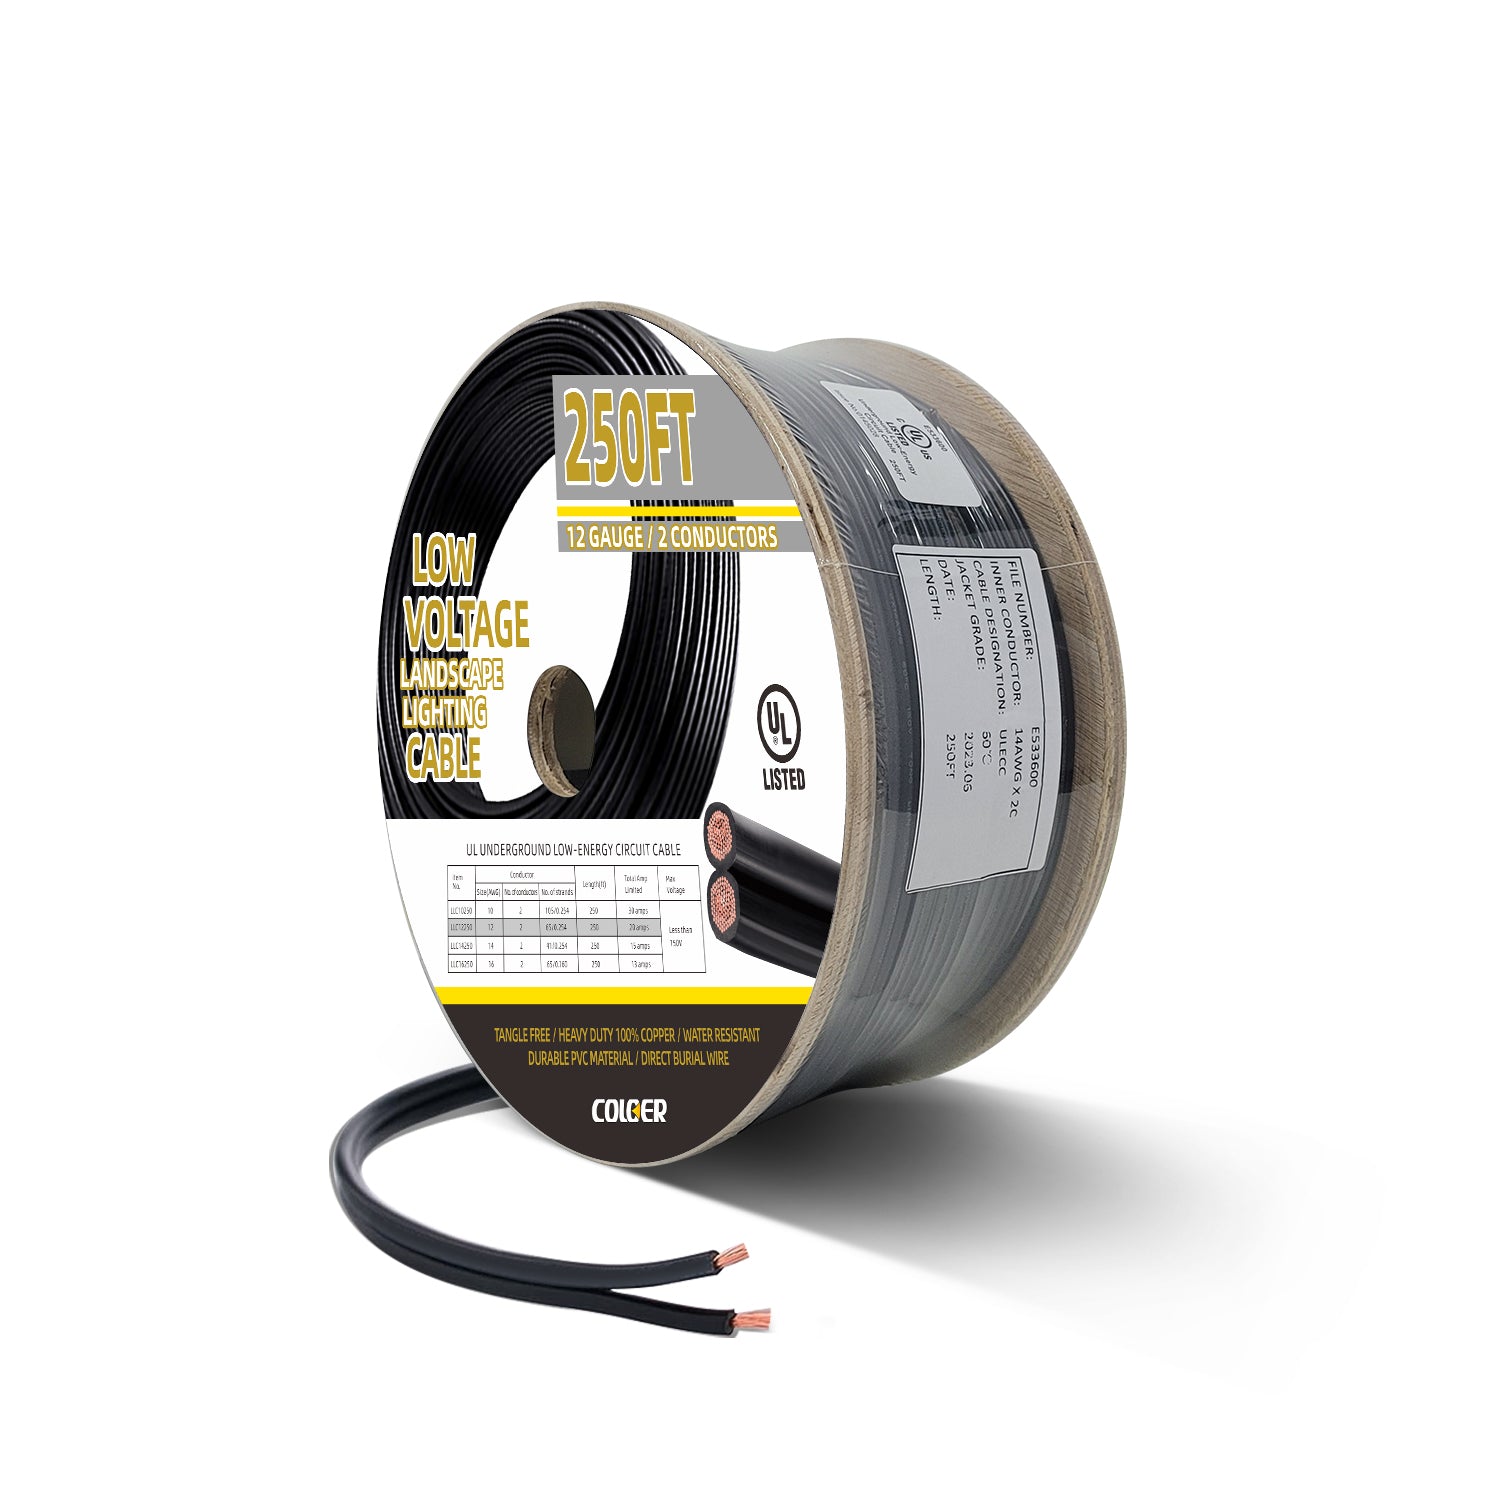 12 Gauge Low Voltage Landscape Wire | 2 Conductor Outdoor Landscape Lighting Direct Burial Electrical Cable COW1102B